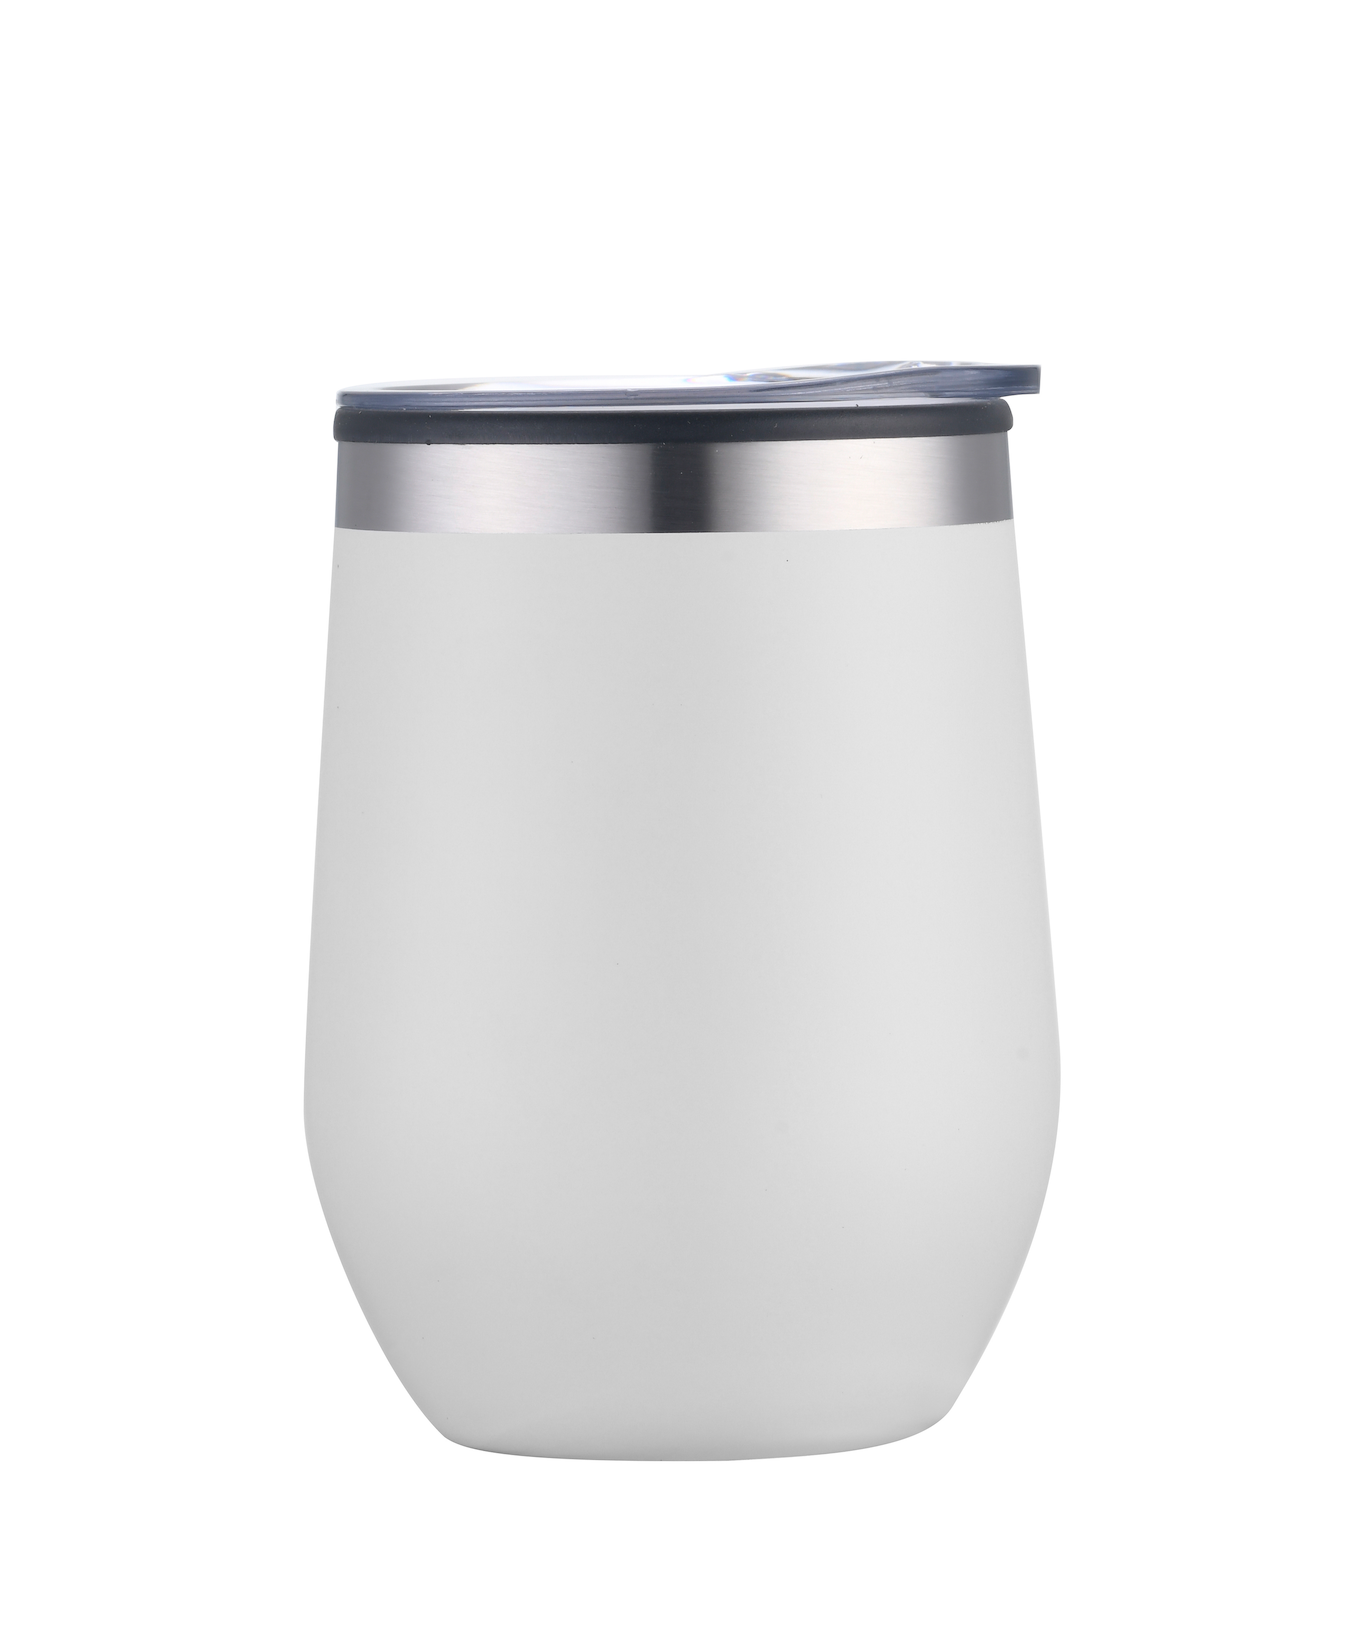 LS-206A – 12oz Double Wall Tumbler with Stainless Steel Rim